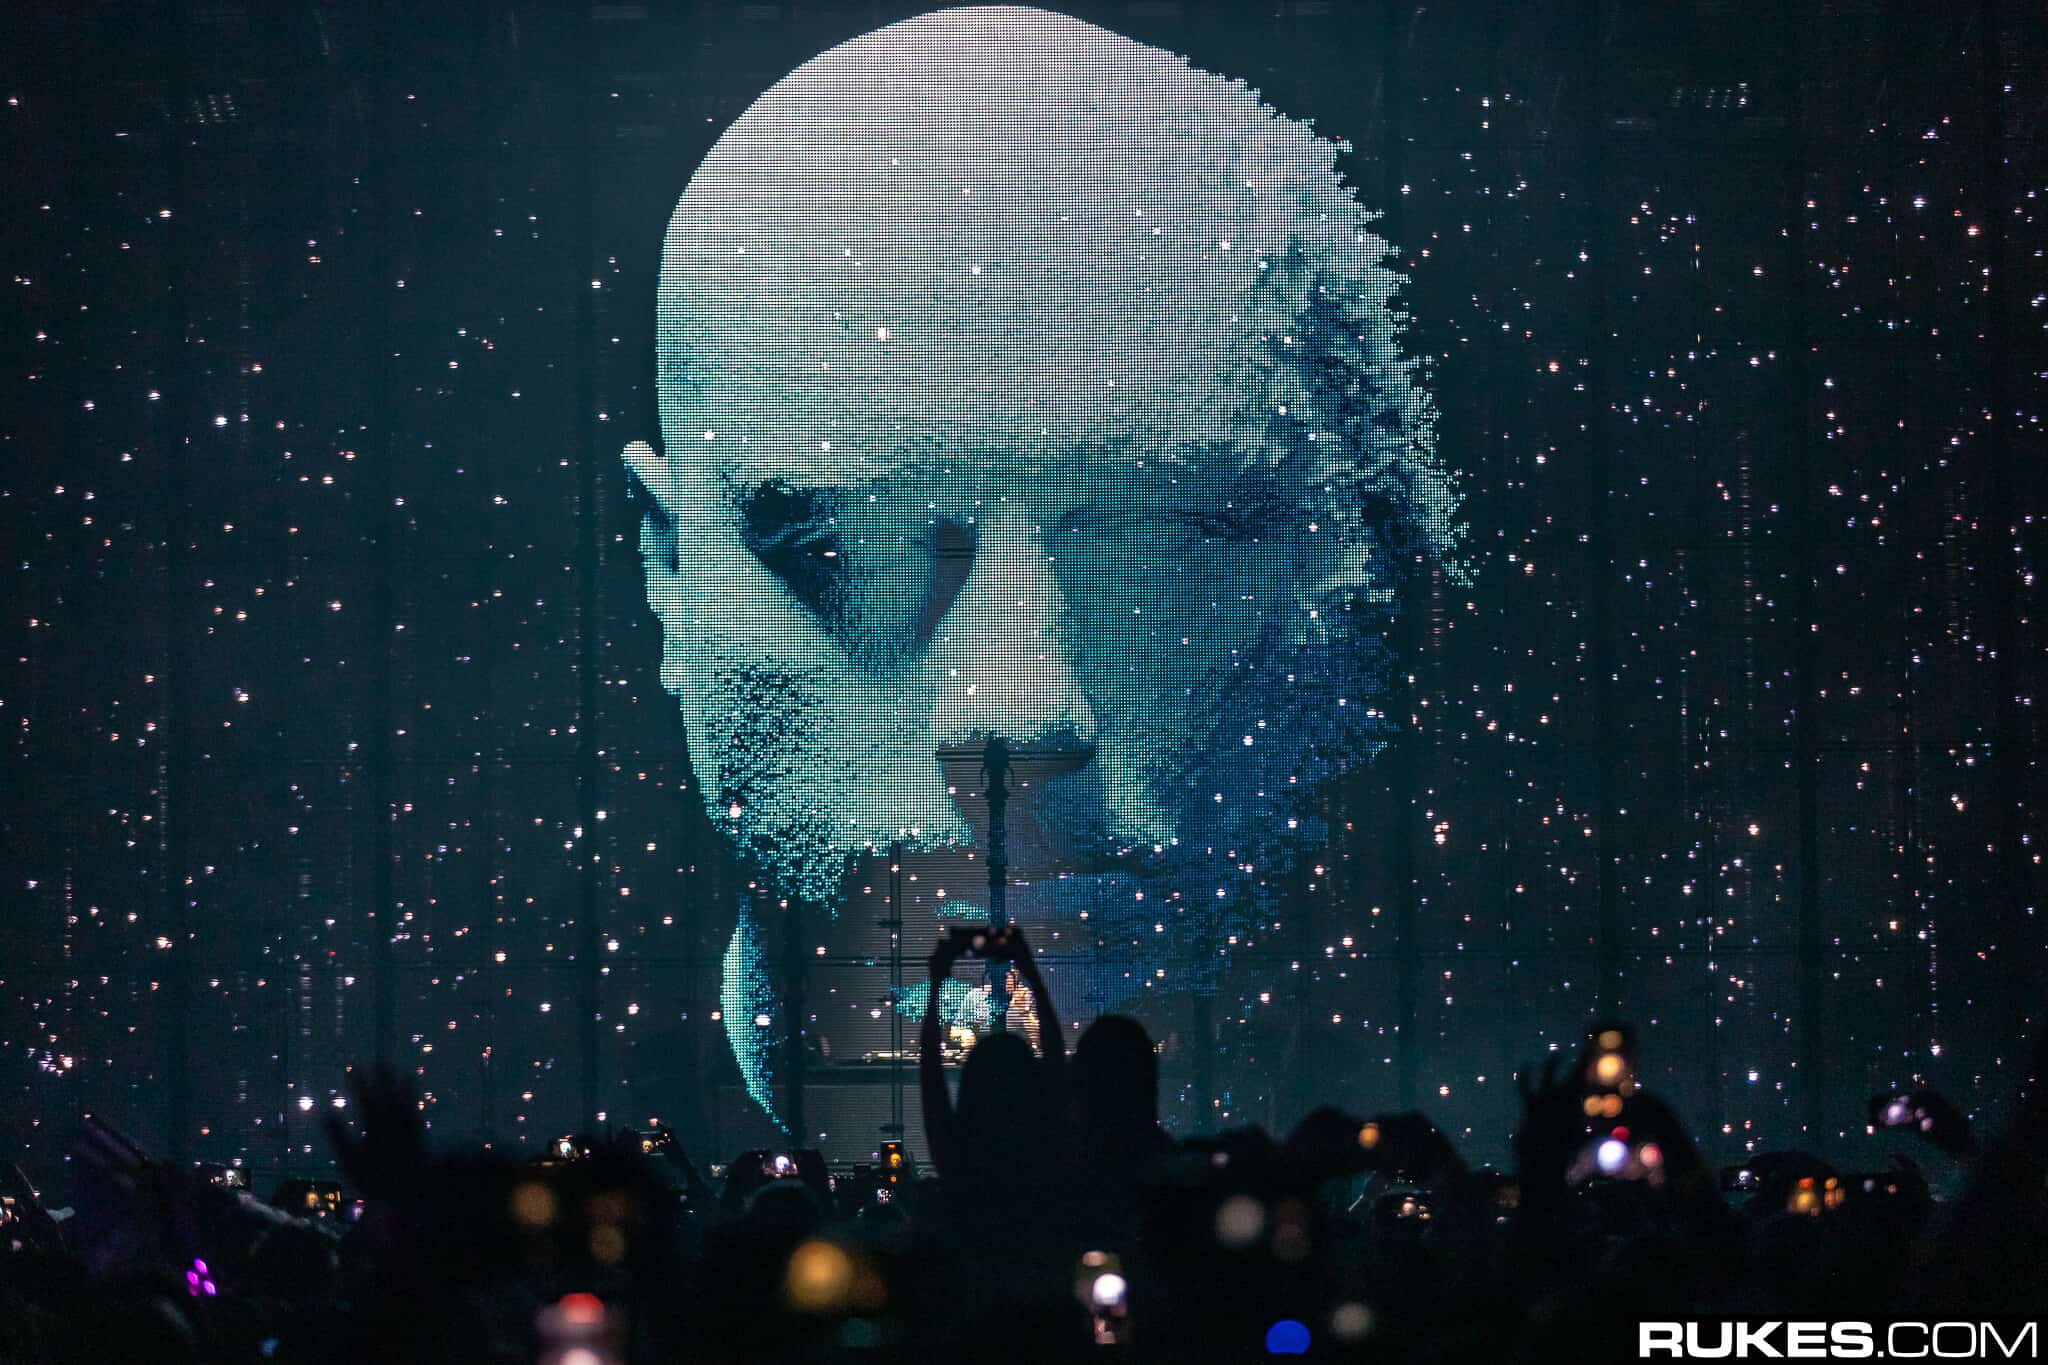 Full video of Eric Prydz's Miami set from earlier this week posted online